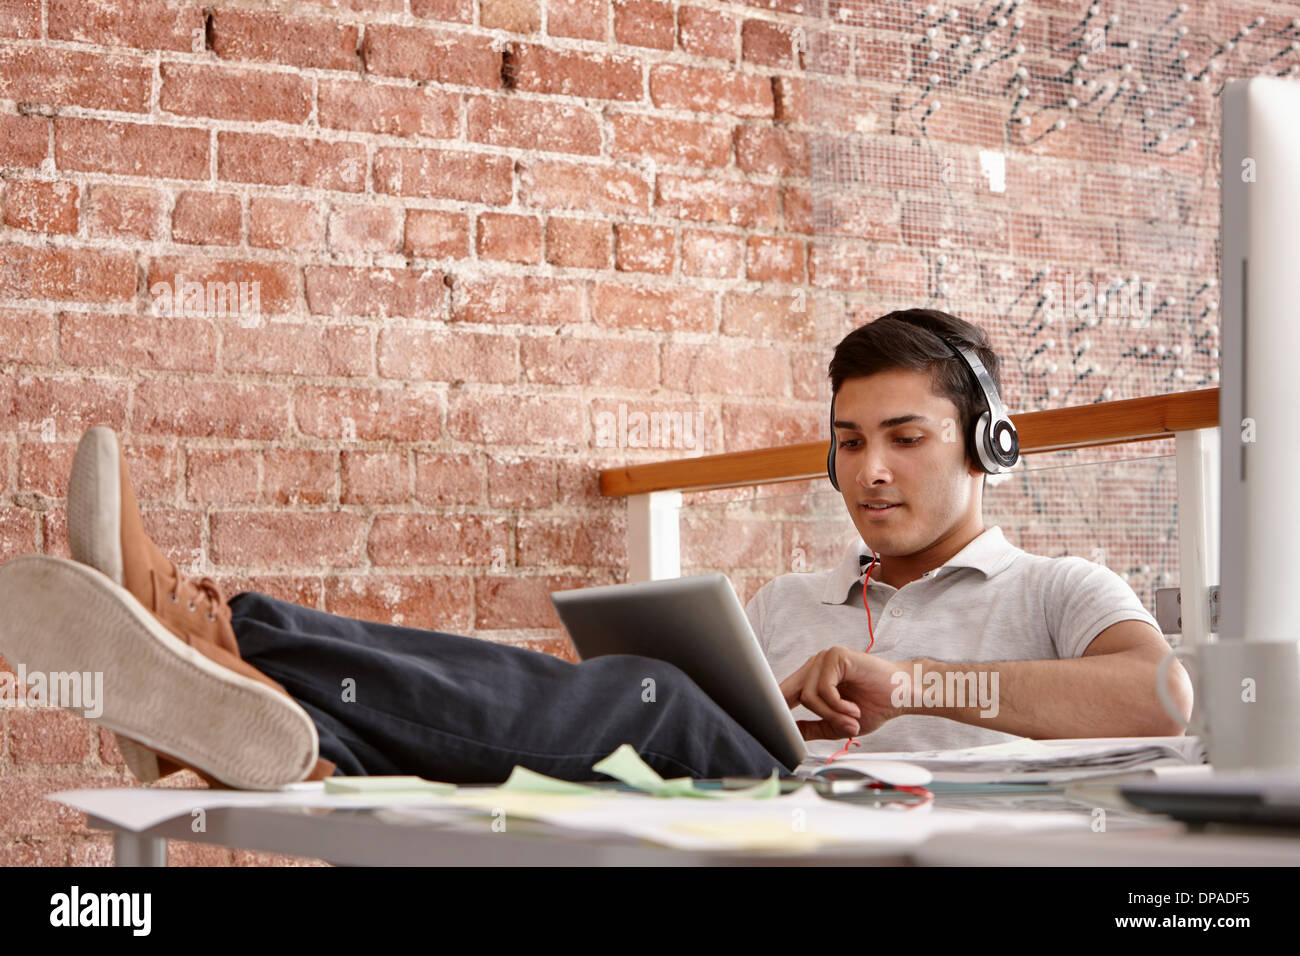 Young man using digital tablet wearing headphones, feet up Stock Photo